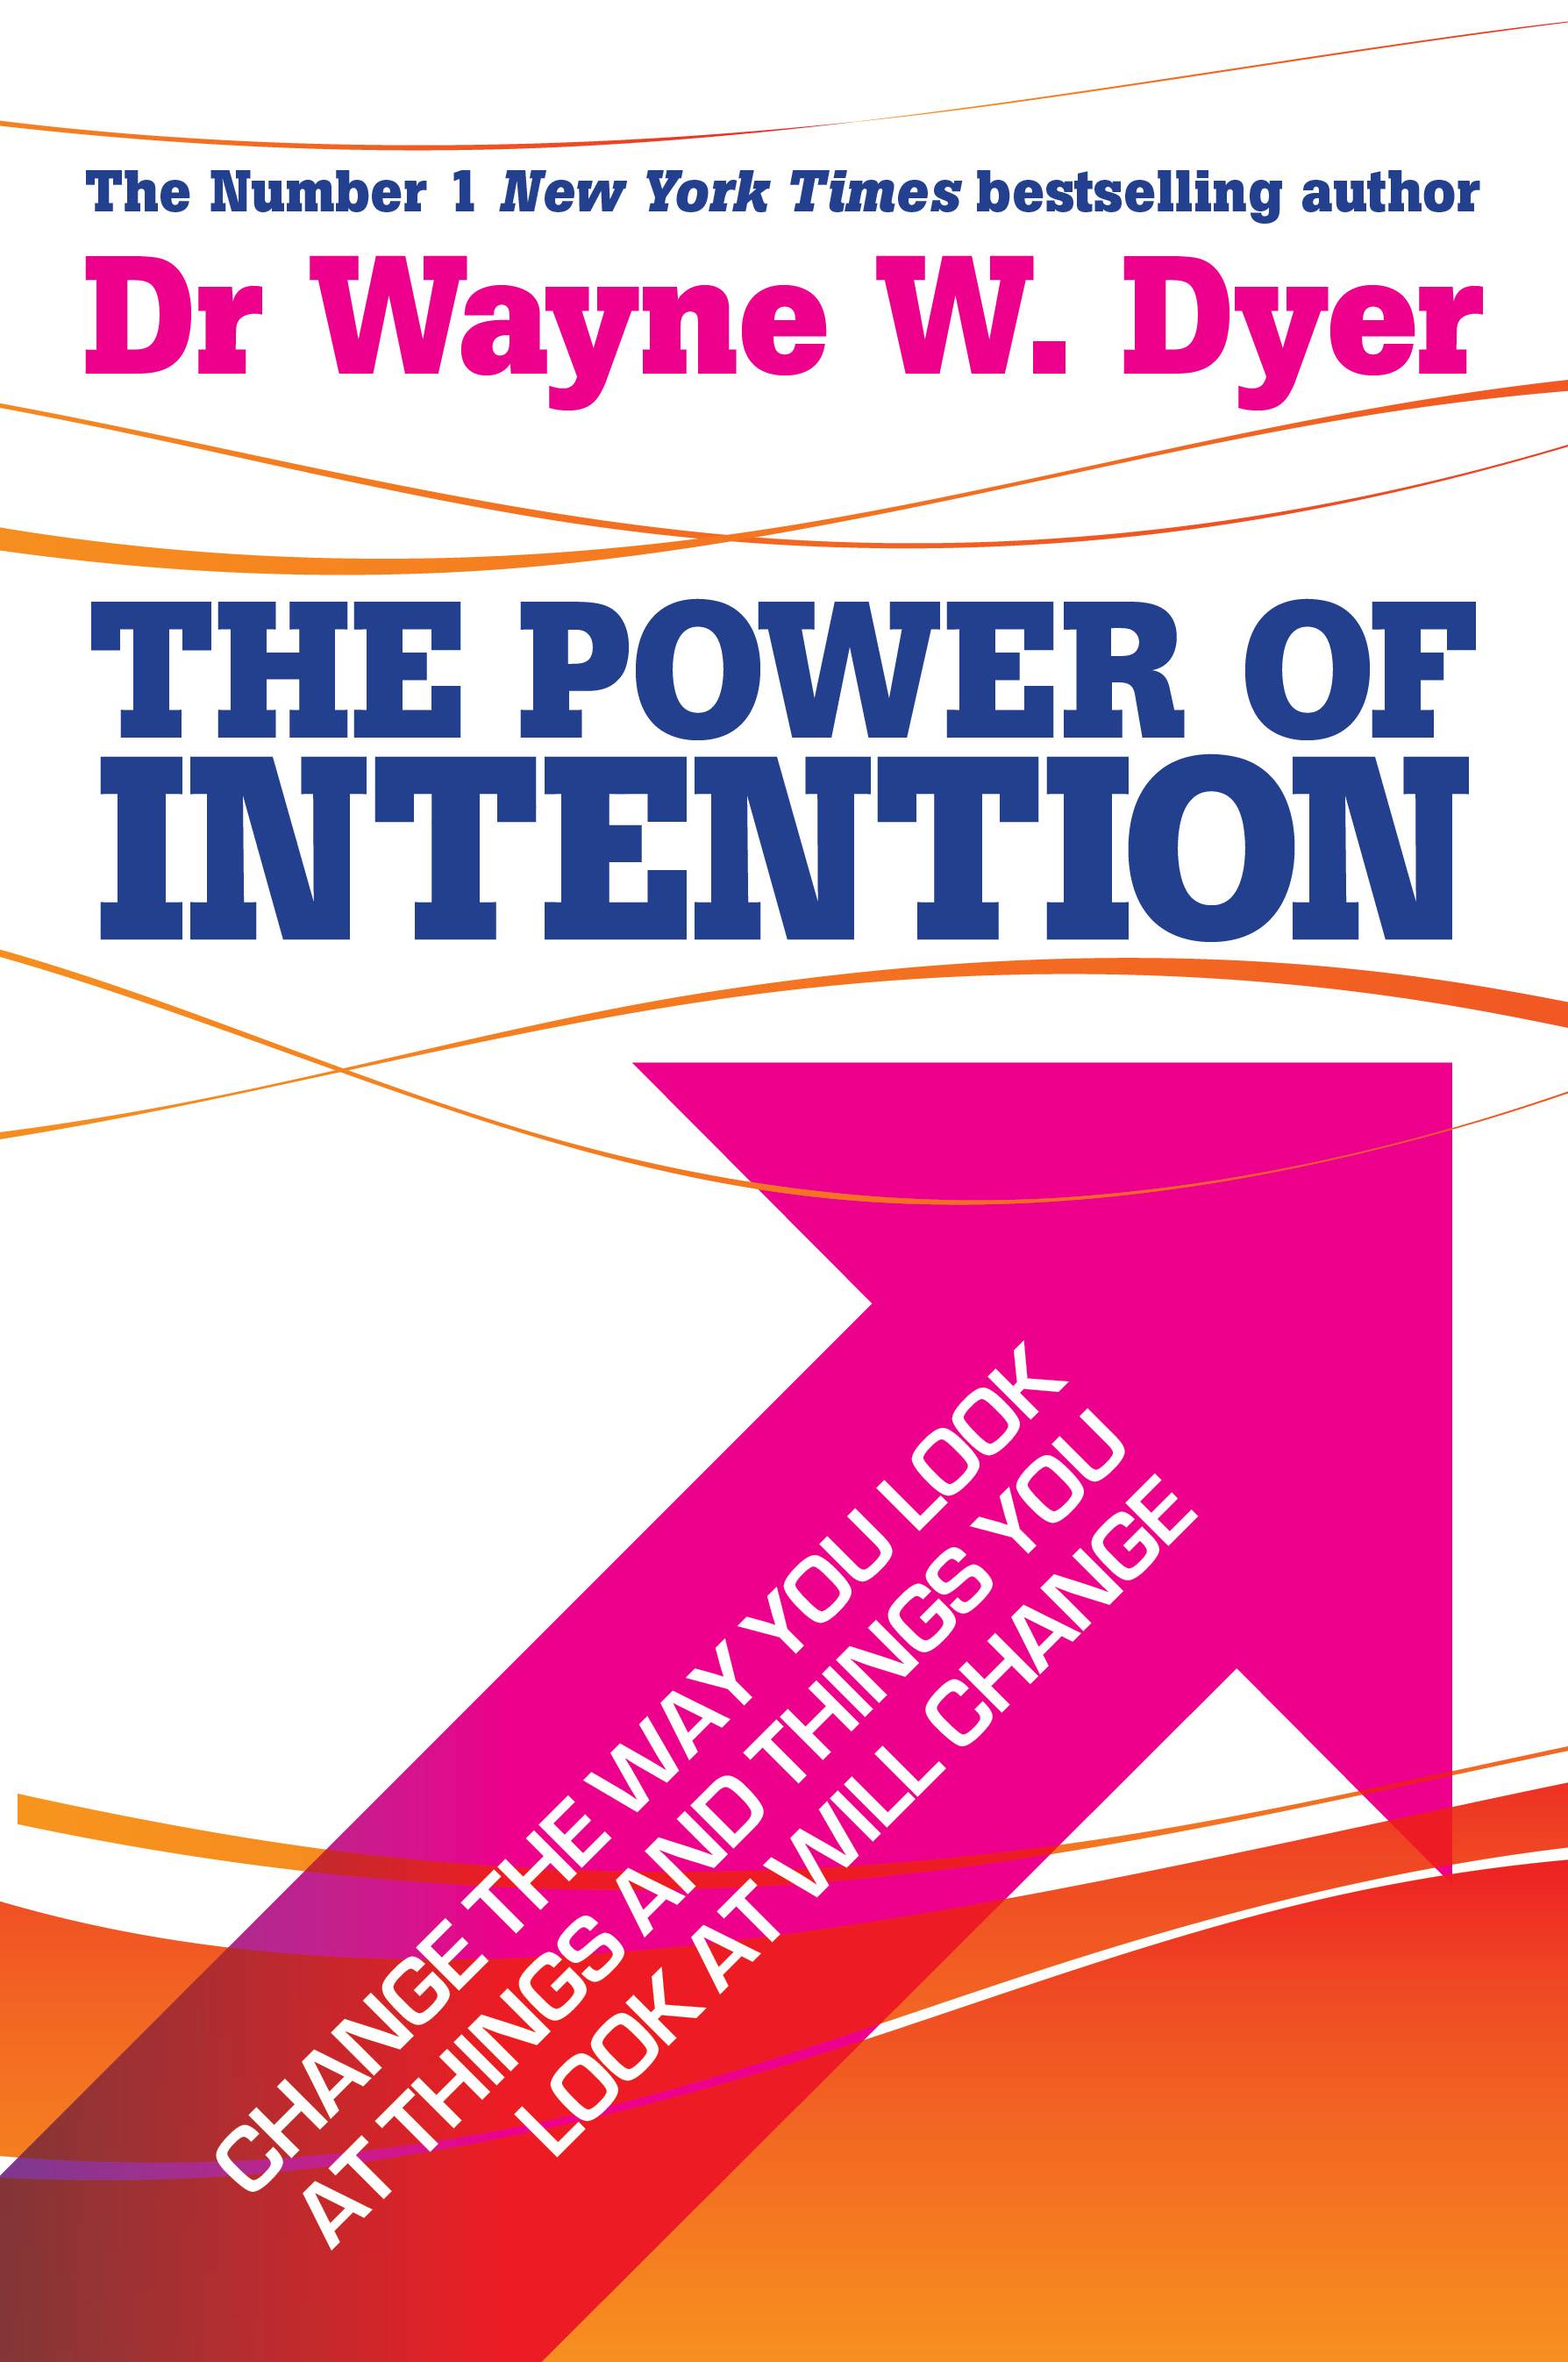 Power of intention - change the way you look at things and the things you l